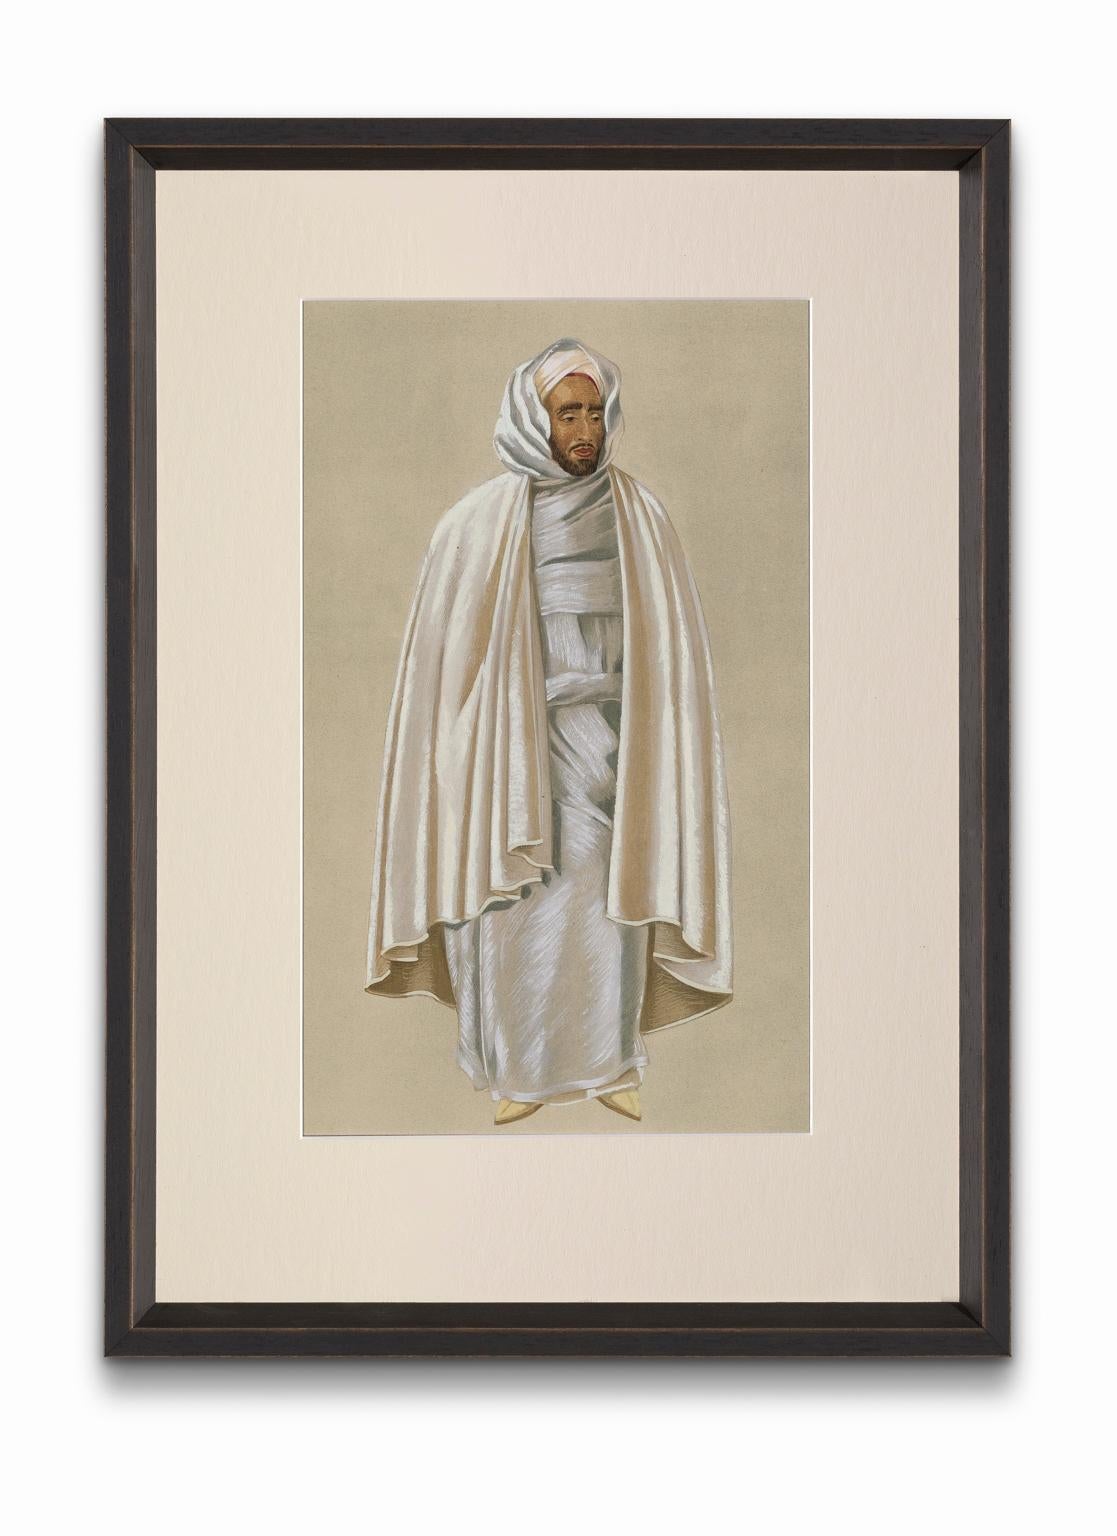 "City Notable" from "Costumes of Morocco", Gouache on Paper